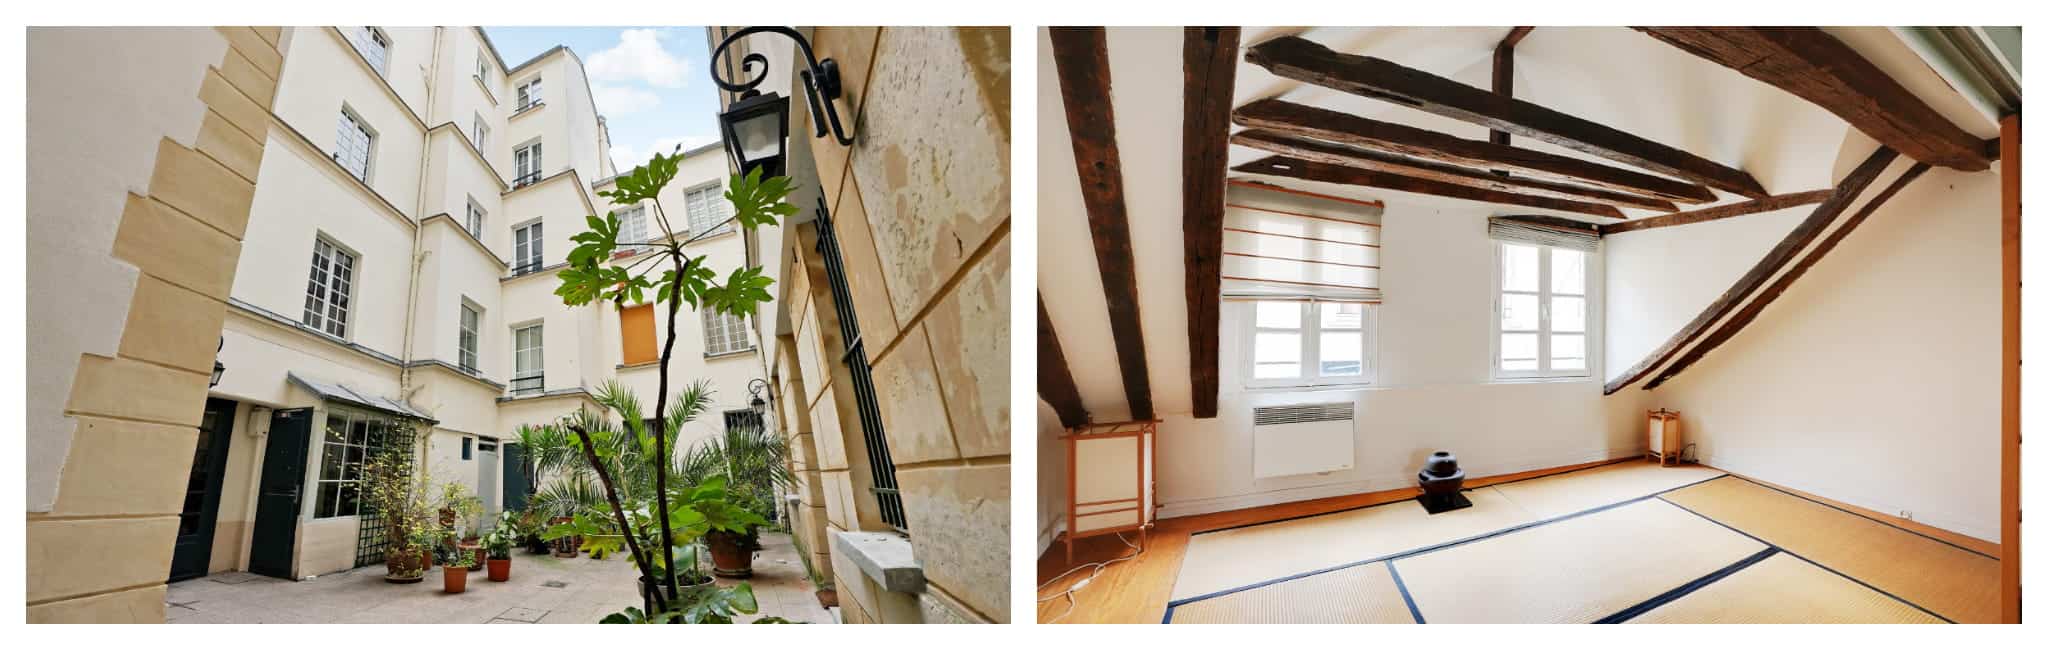 left: the courtyard of the Saint-Germain flat and the living room with historic brown beams and white walls.